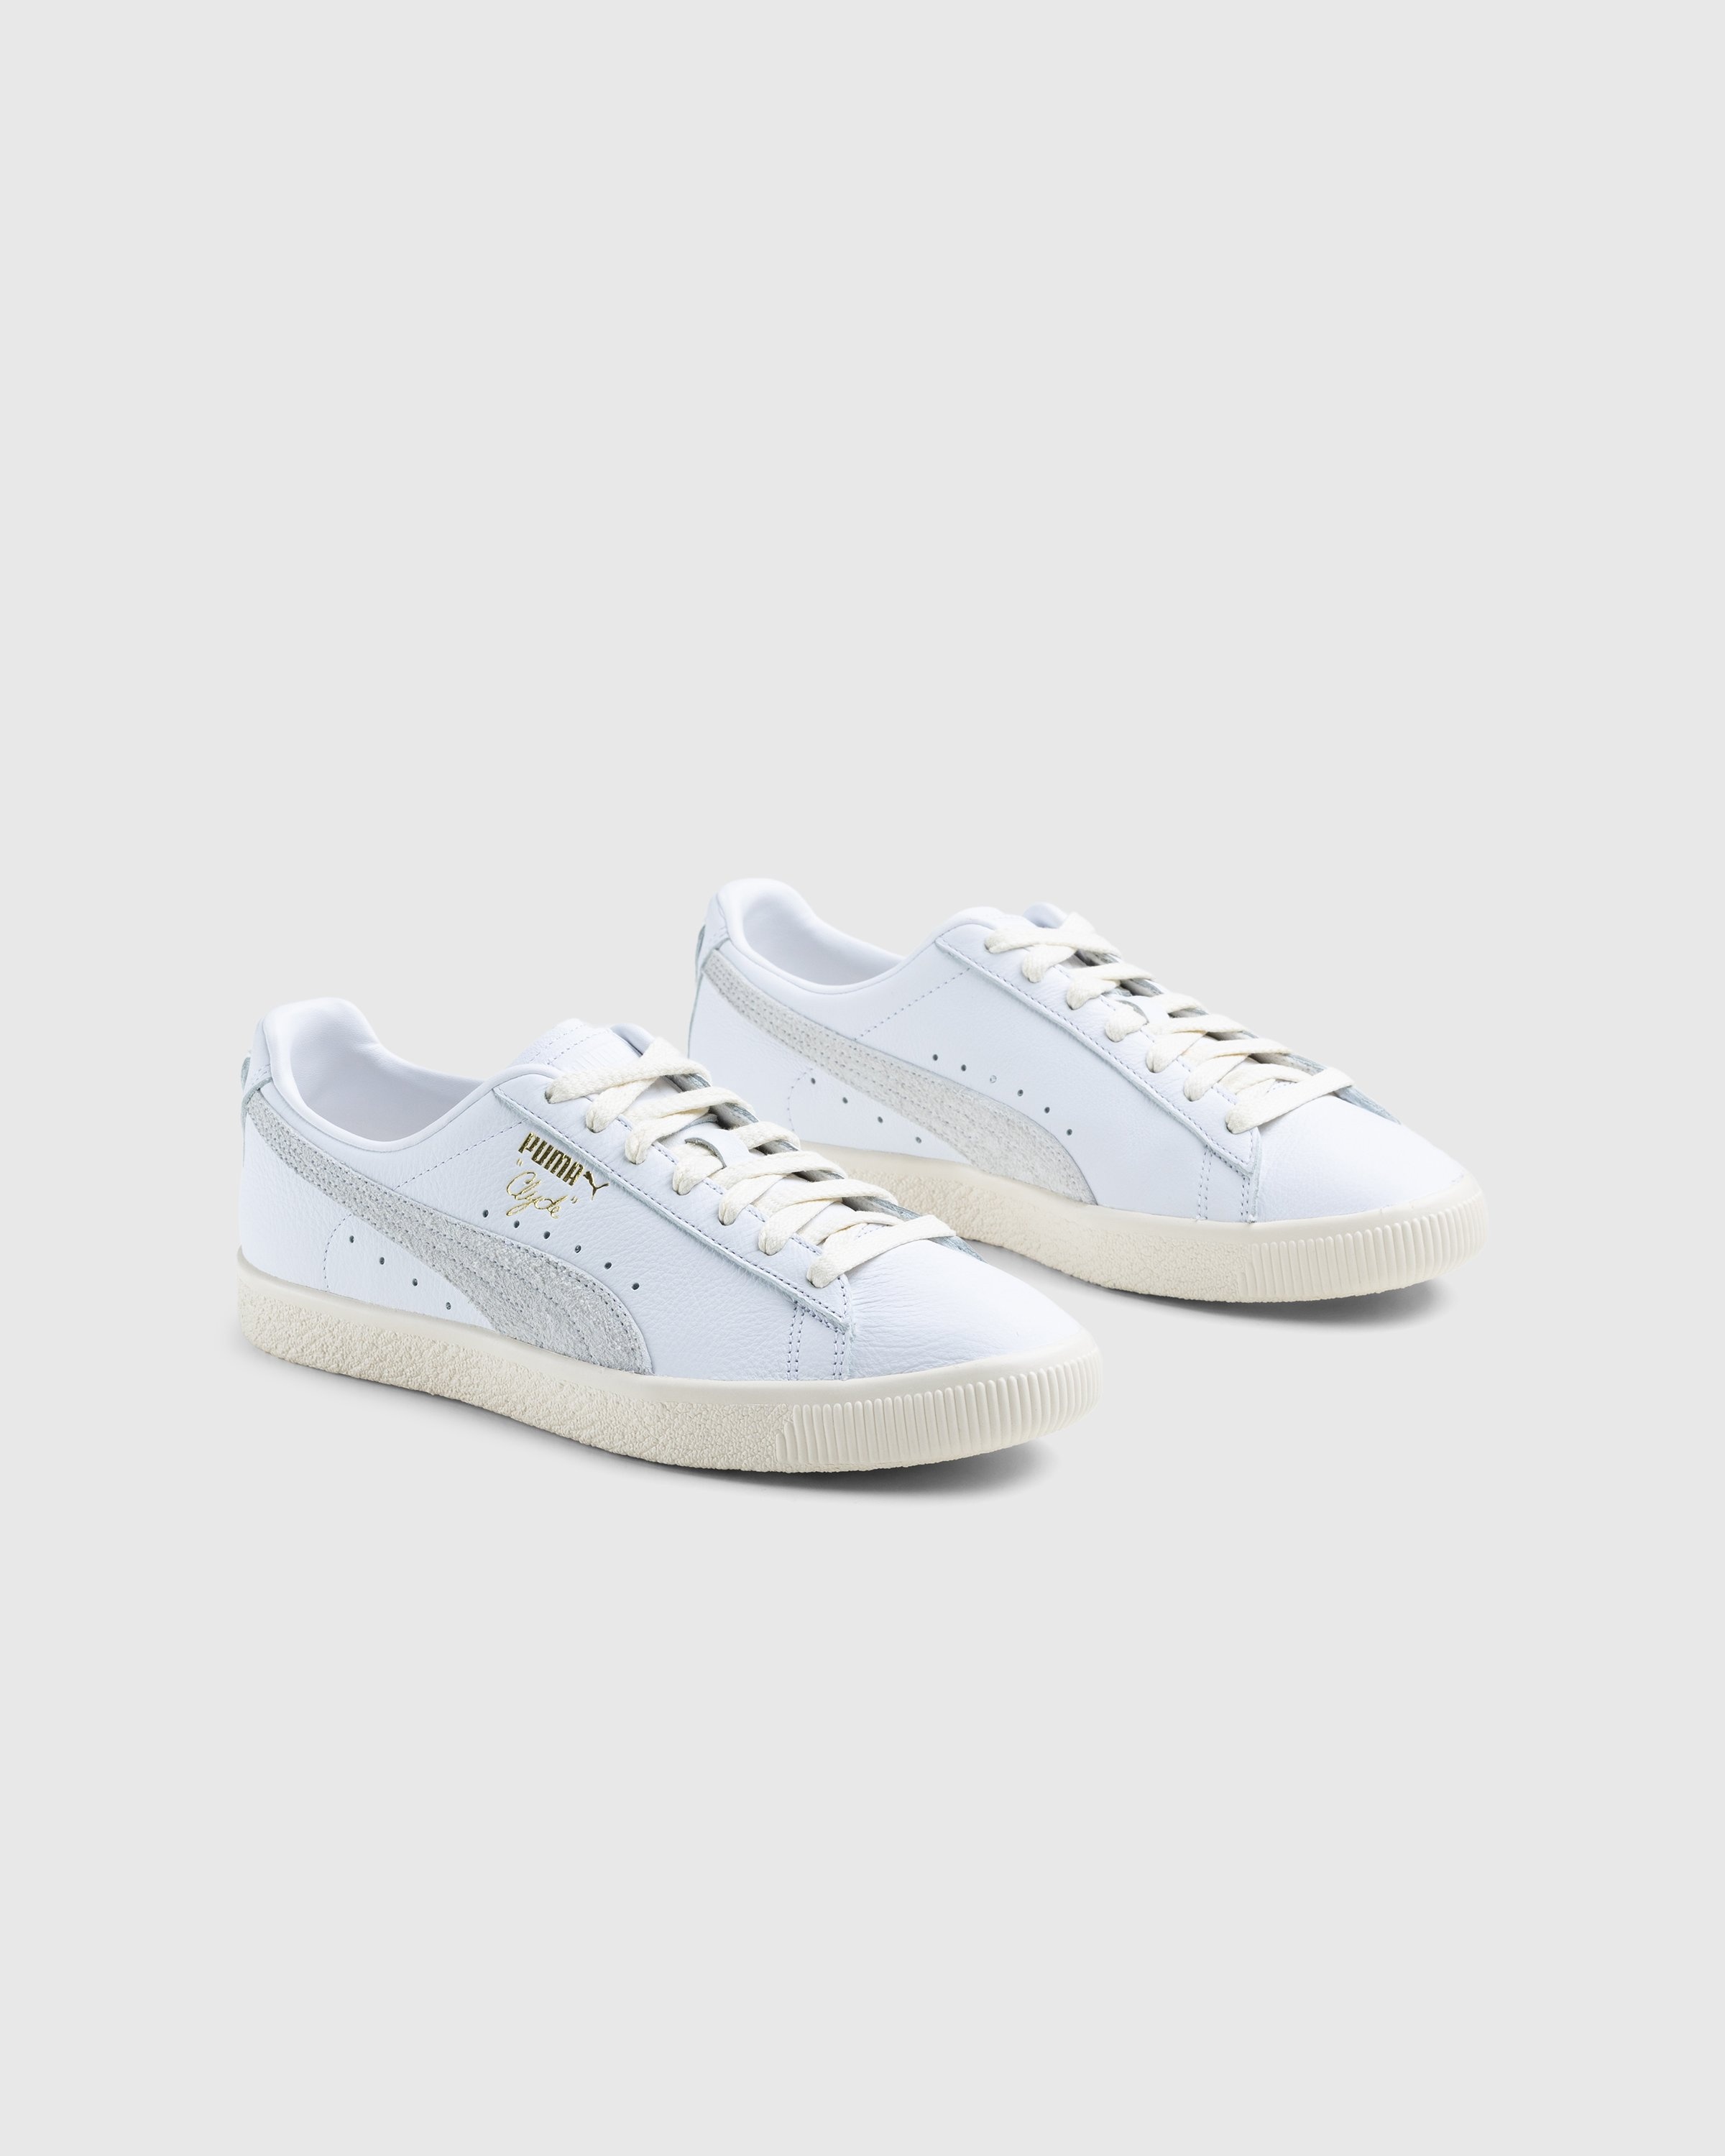 Puma – Clyde Base White - Sneakers - White - Image 3